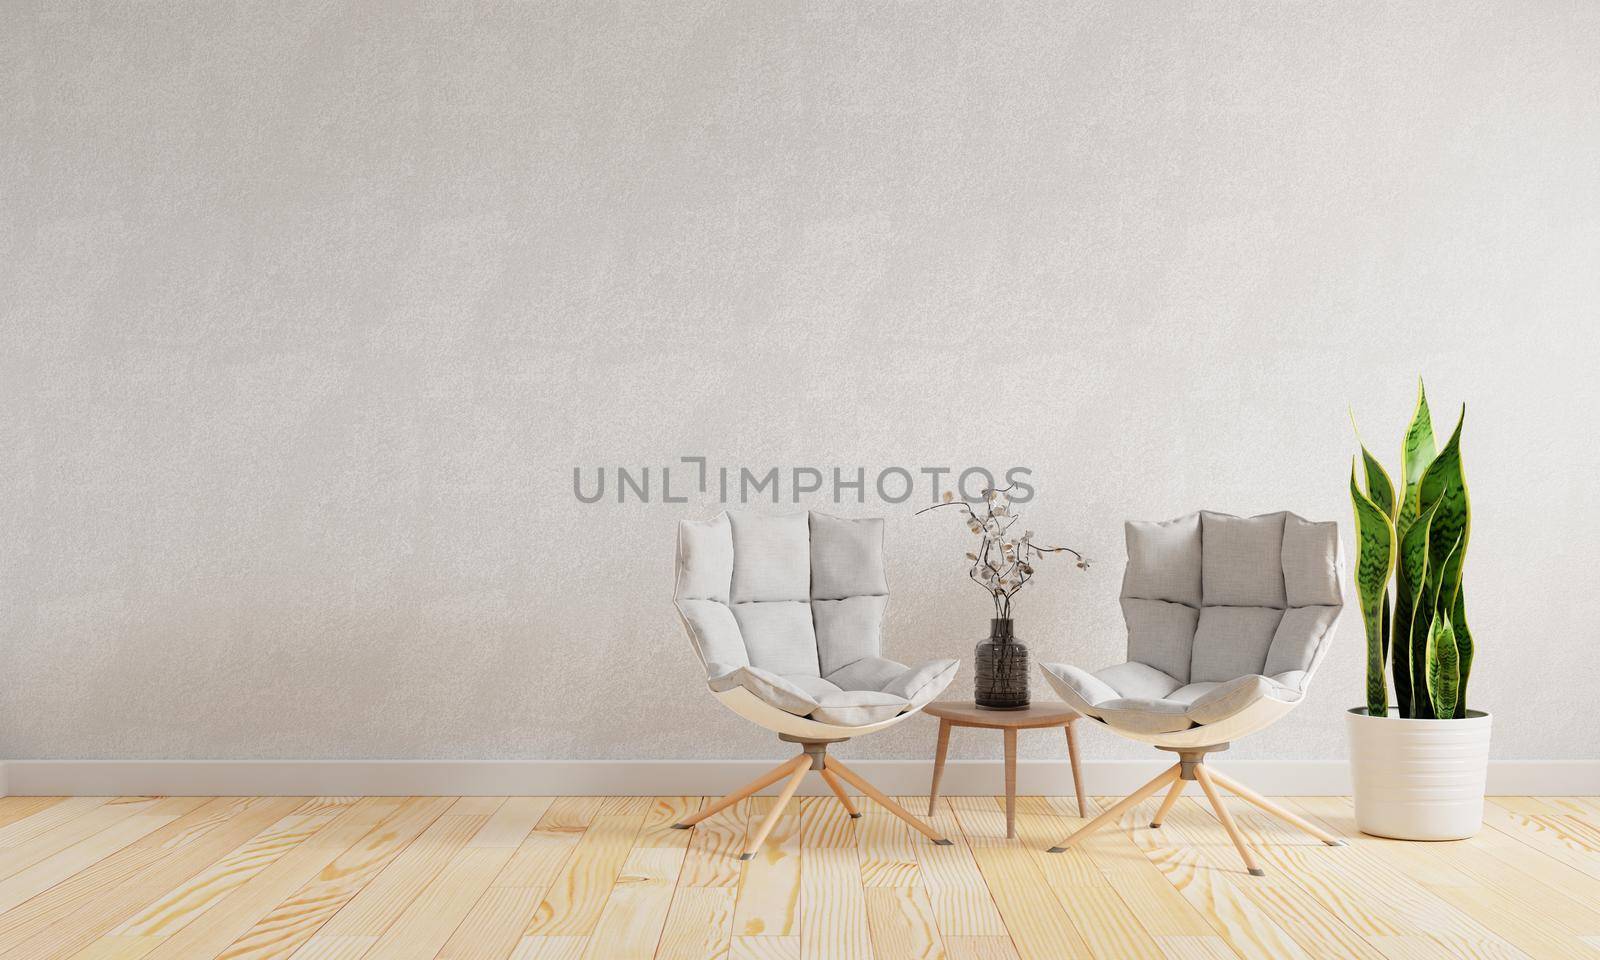 Modern living room at home with copy space wall background. Interior and Architecture concept. 3D illustration rendering